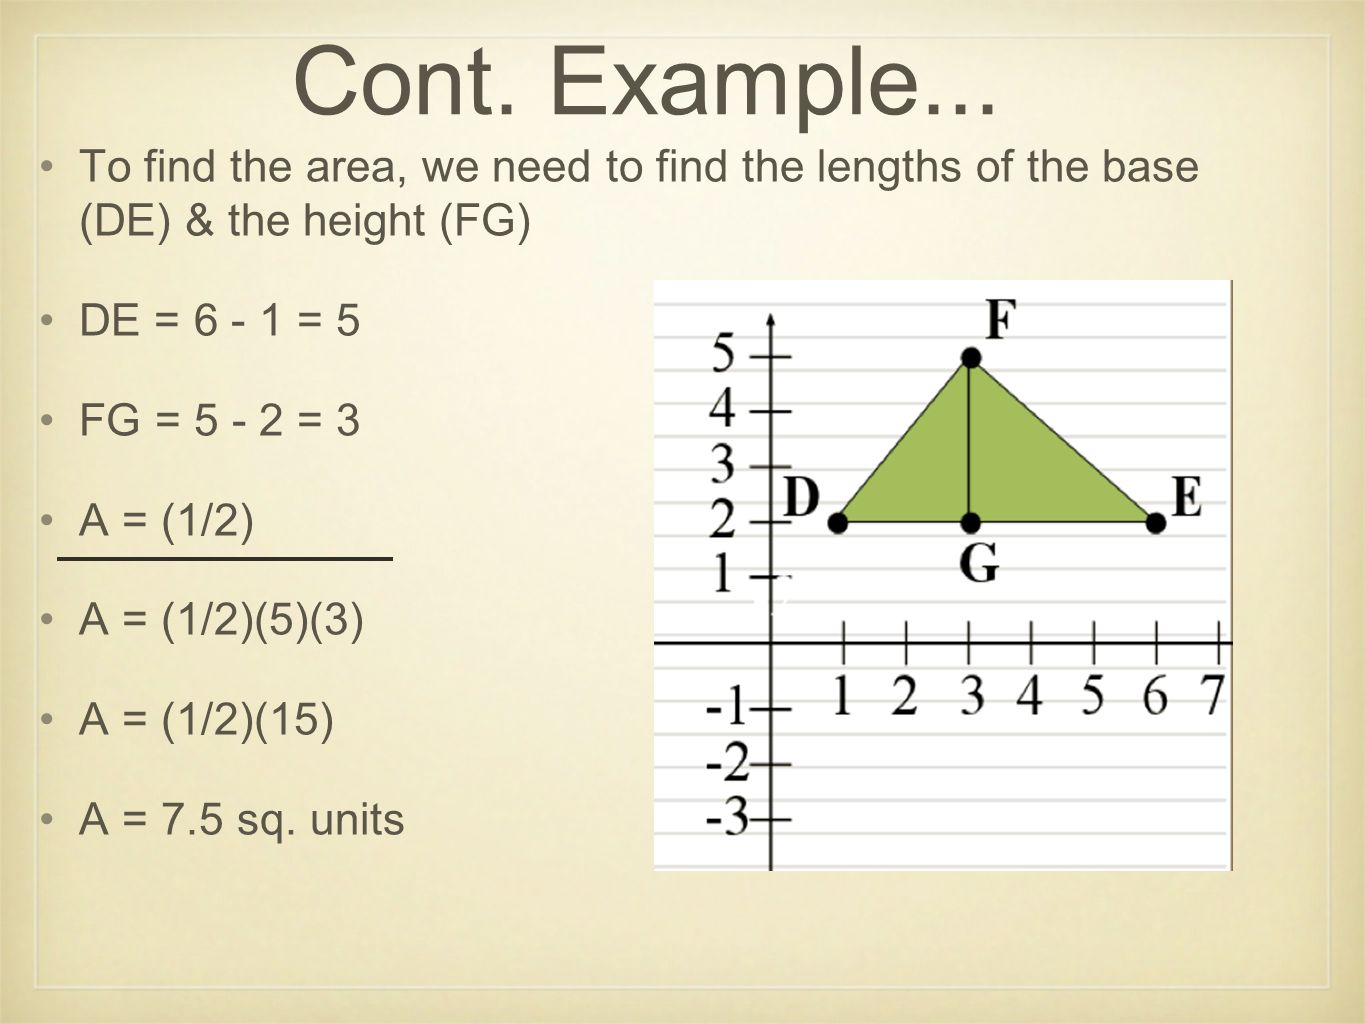 Cont. Example... To find the area, we need to find the lengths of the base (DE) & the height (FG) DE = = 5.